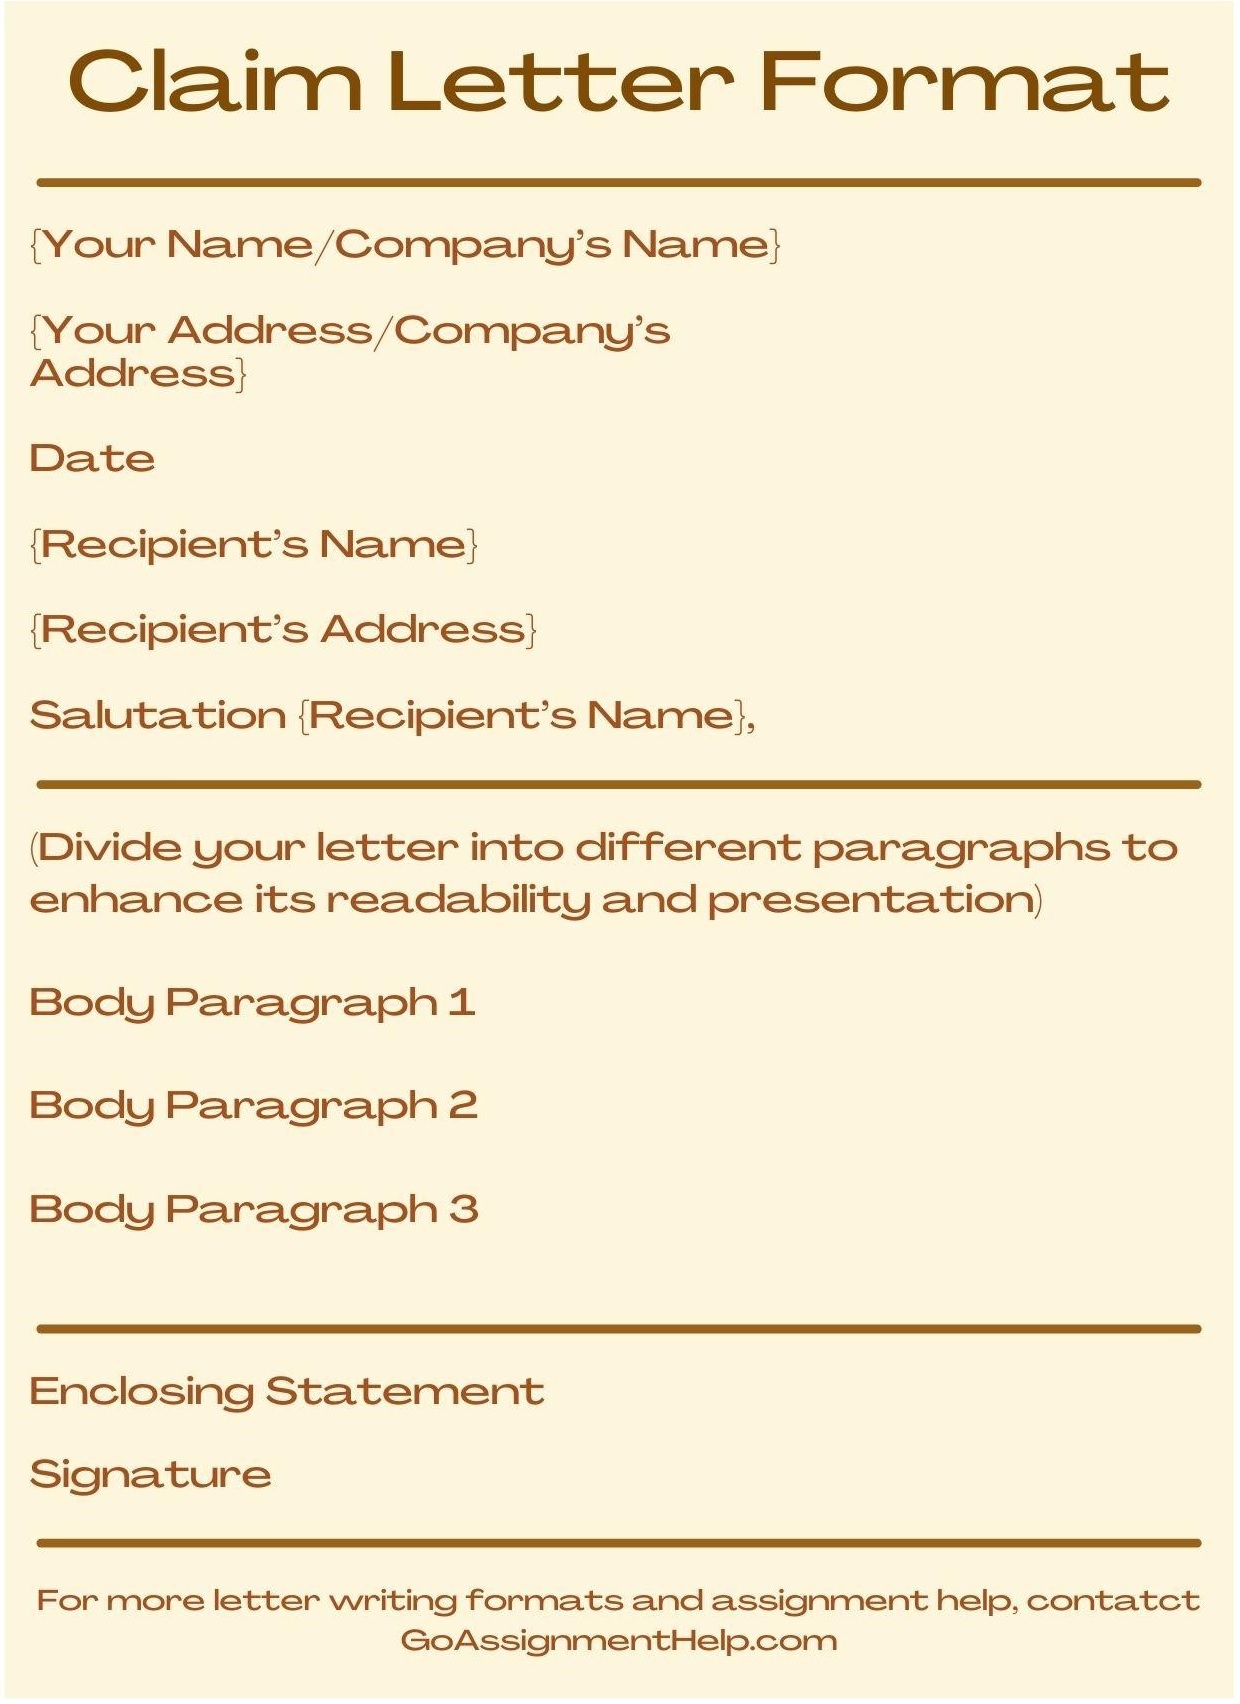 how to write a statement letter sample